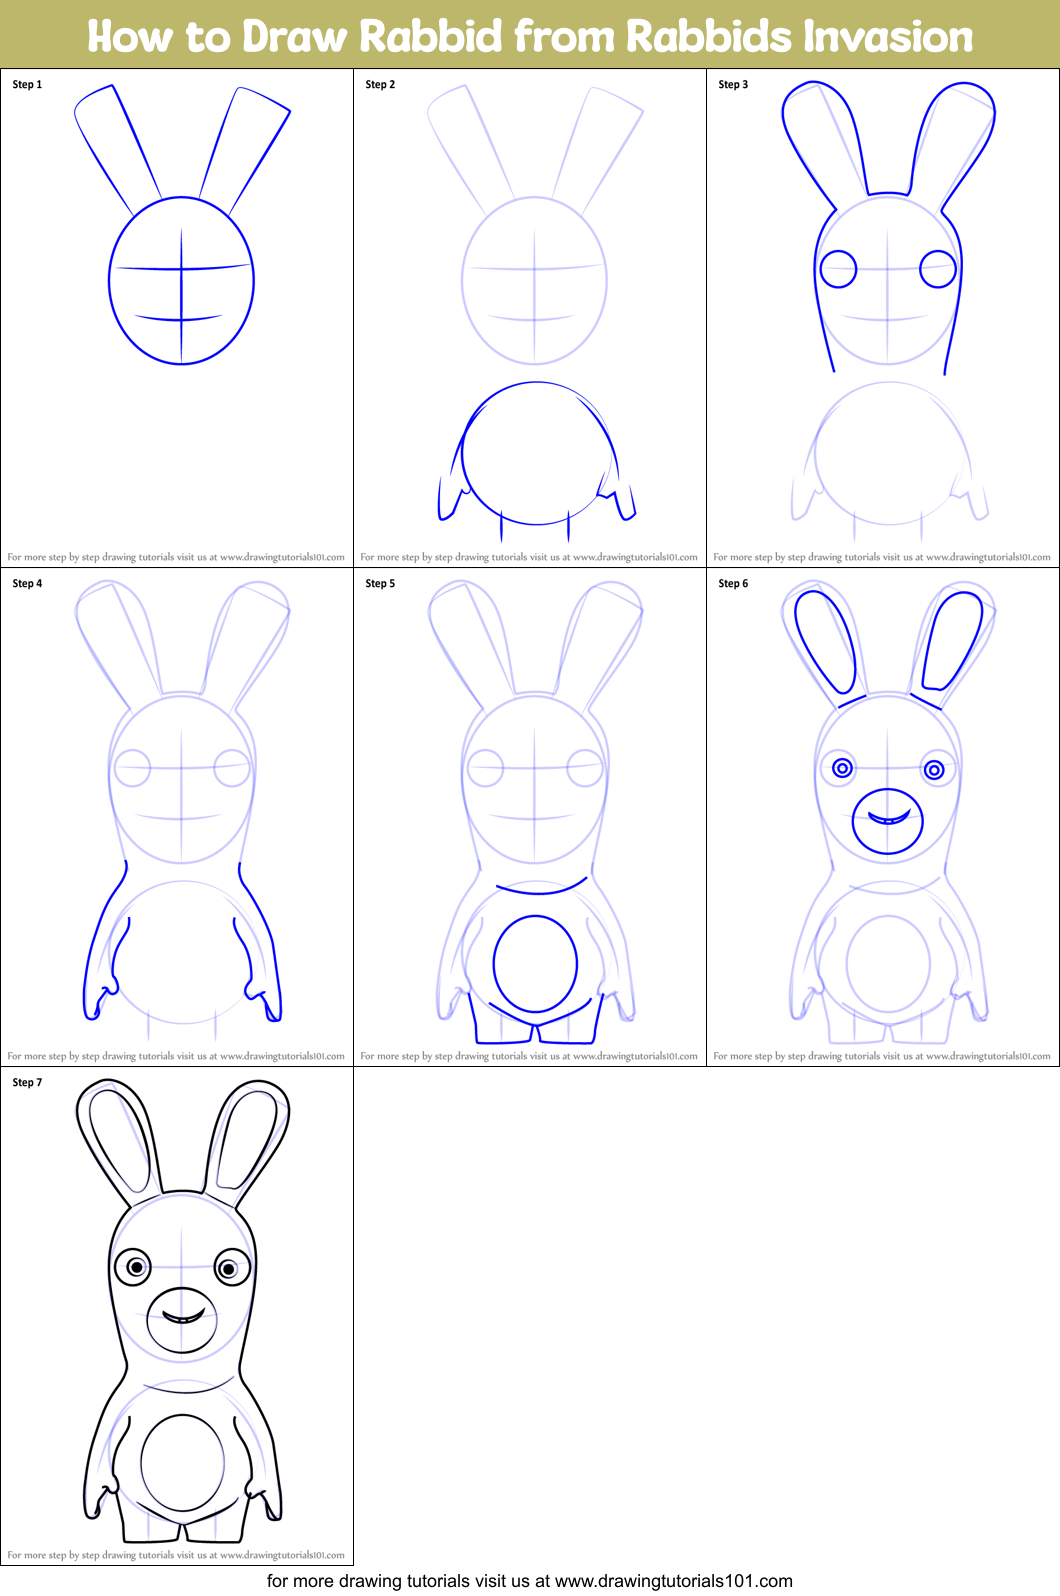 how to draw rabbids invasion